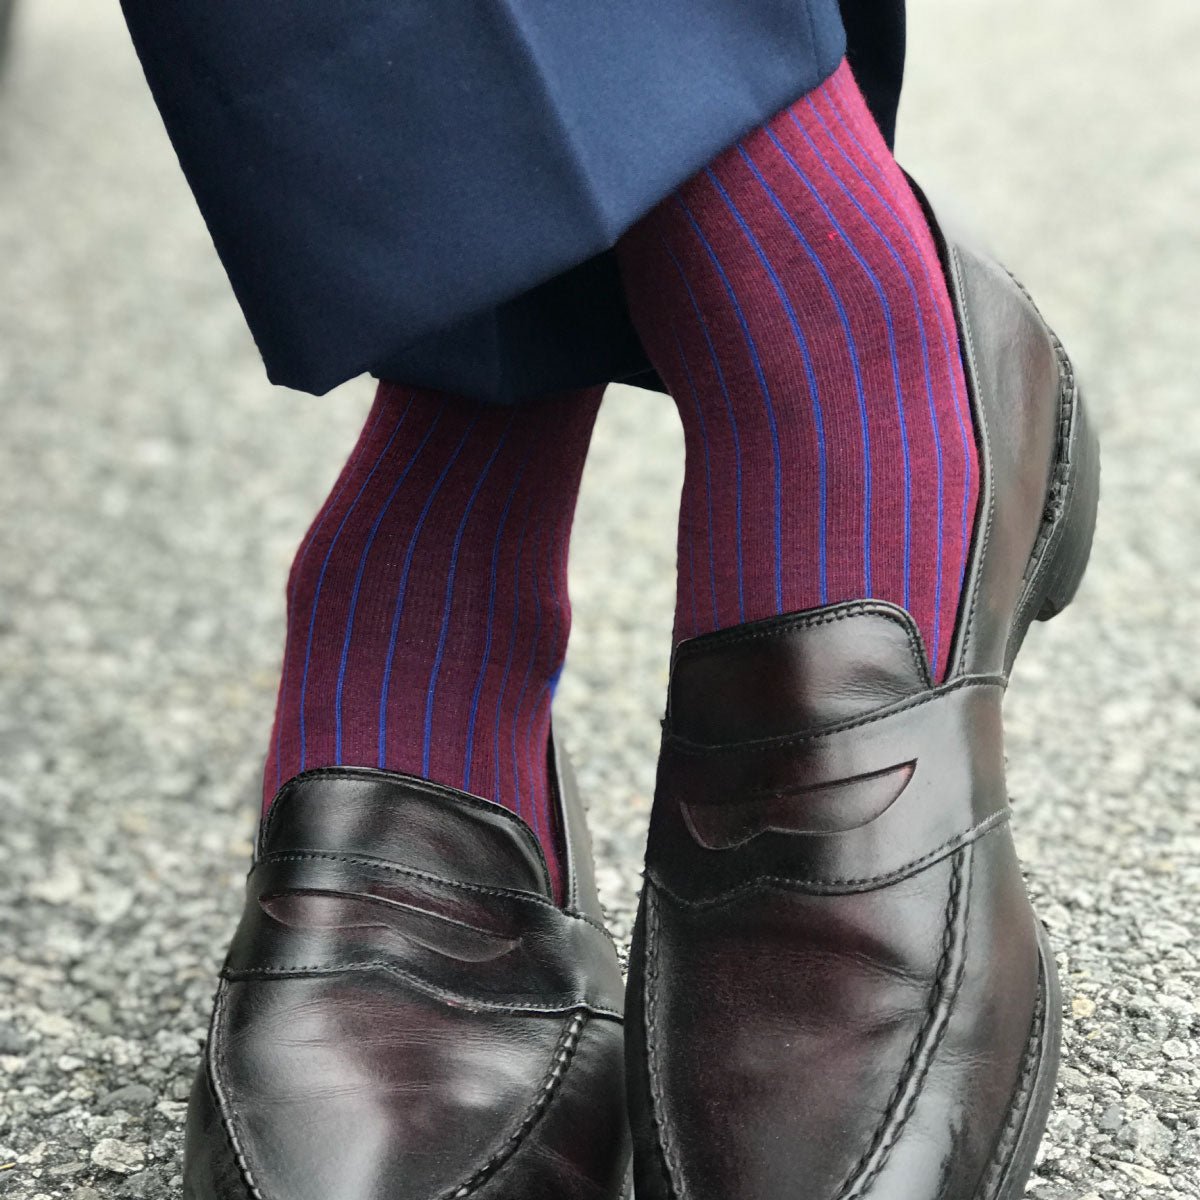 guy wearing blue and red pinstripe dress socks